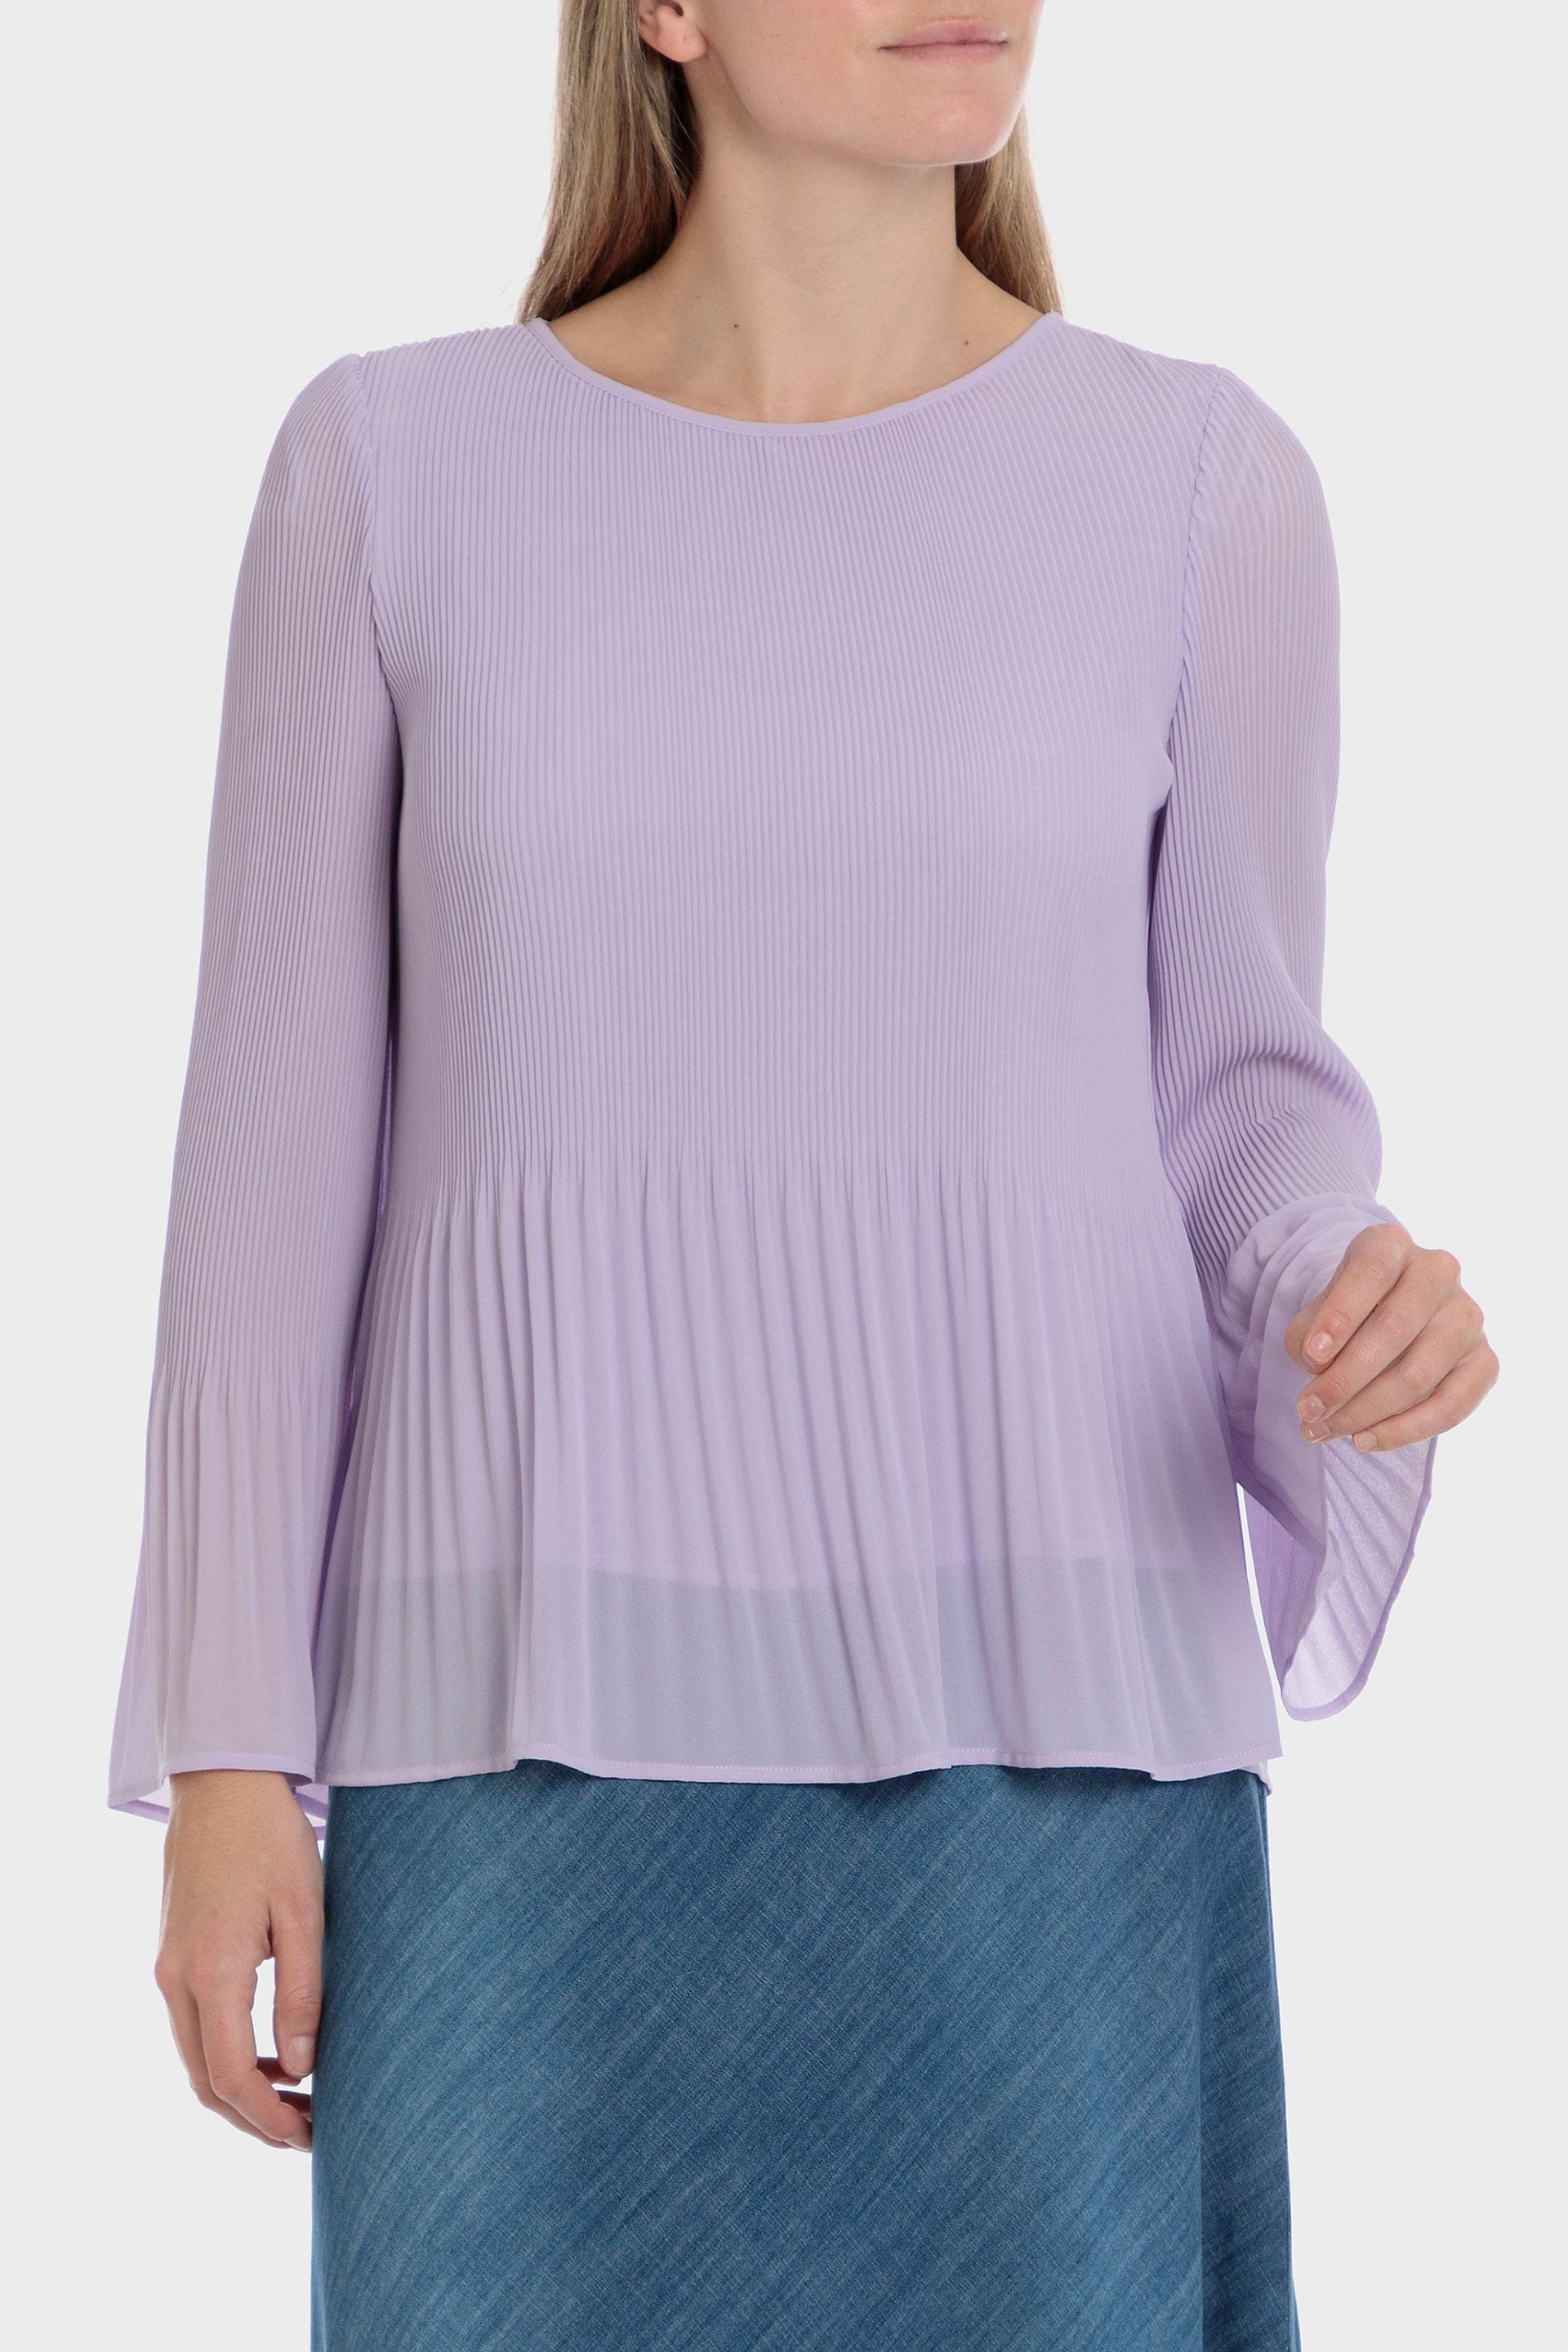 Punt Roma - Pink Loose Fitting Blouse